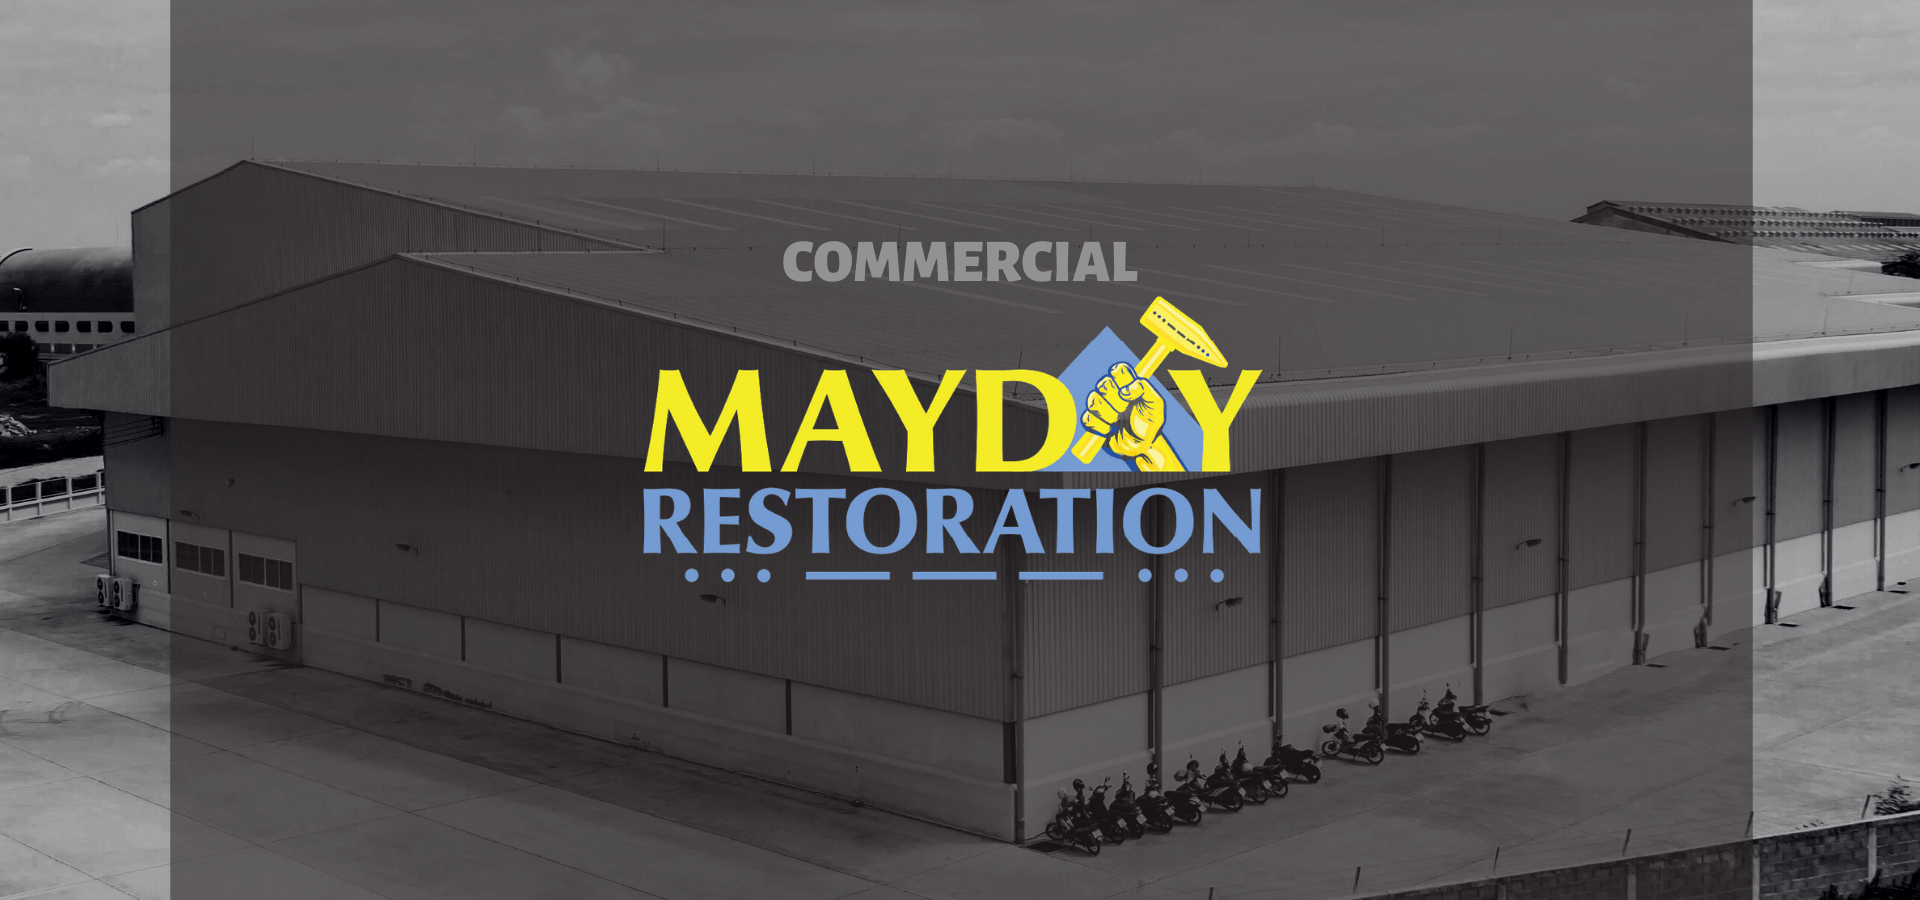 Roofing Contractor Services provided by Mayday Restoration. Residential services, Commercial roofing, multi family roofing,  and agricultural roofing